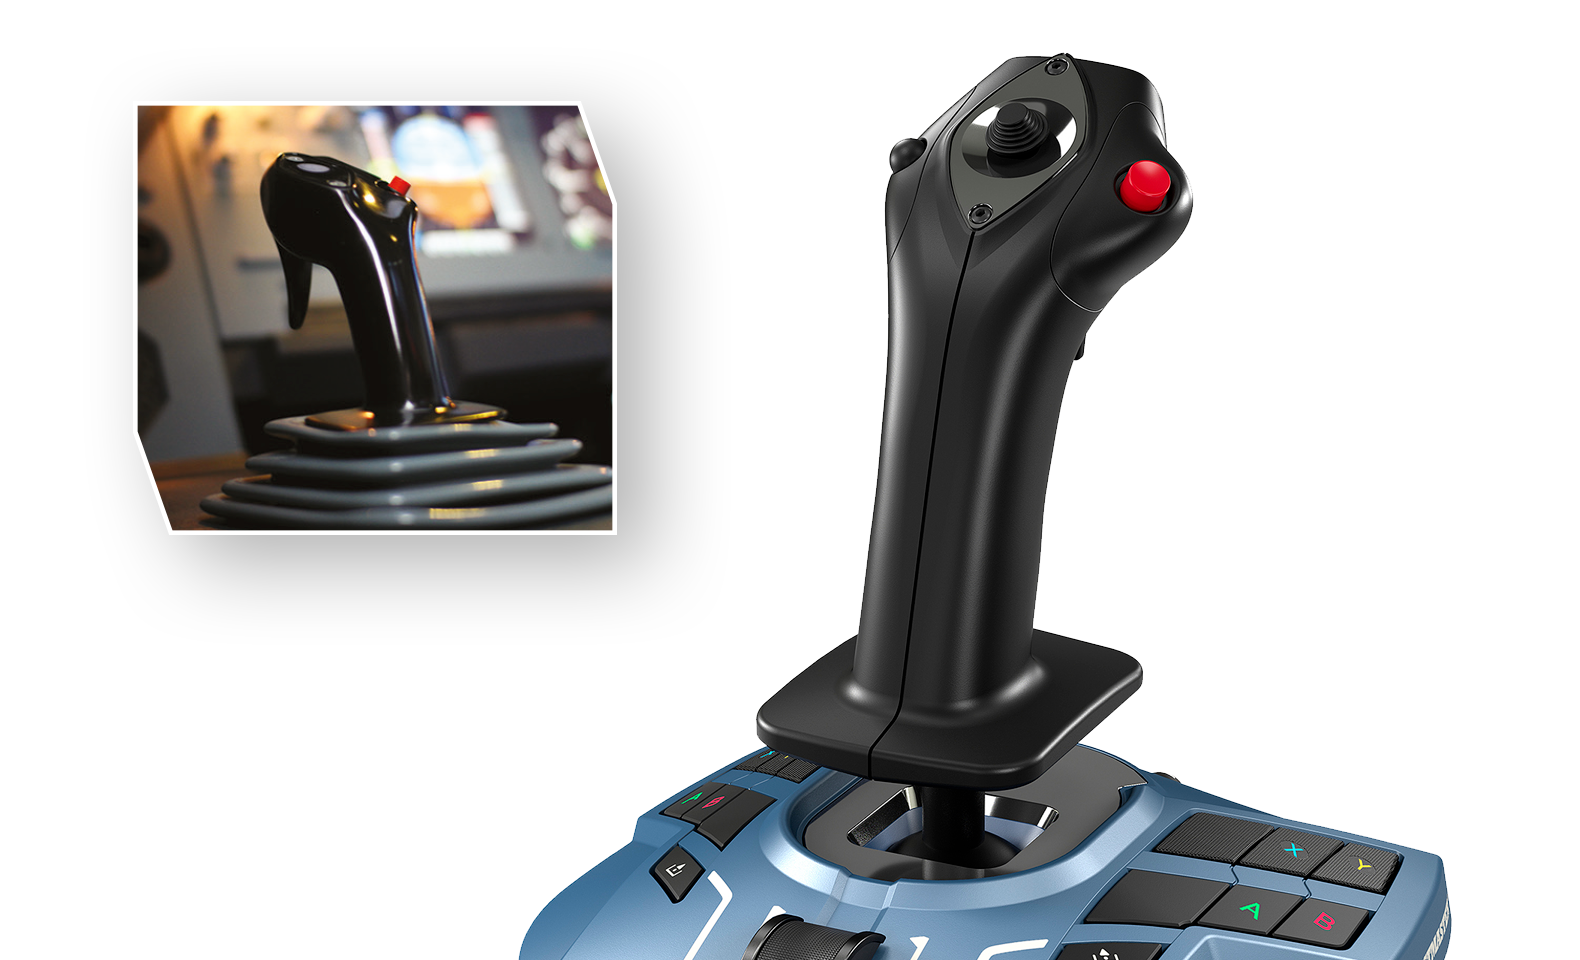 Thrustmaster Official on X: The TCA Captain Pack Airbus Edition will be  available for preorder on Thursday! Get ready to fly high! Officially  licensed by Airbus & compatible with PC.  /